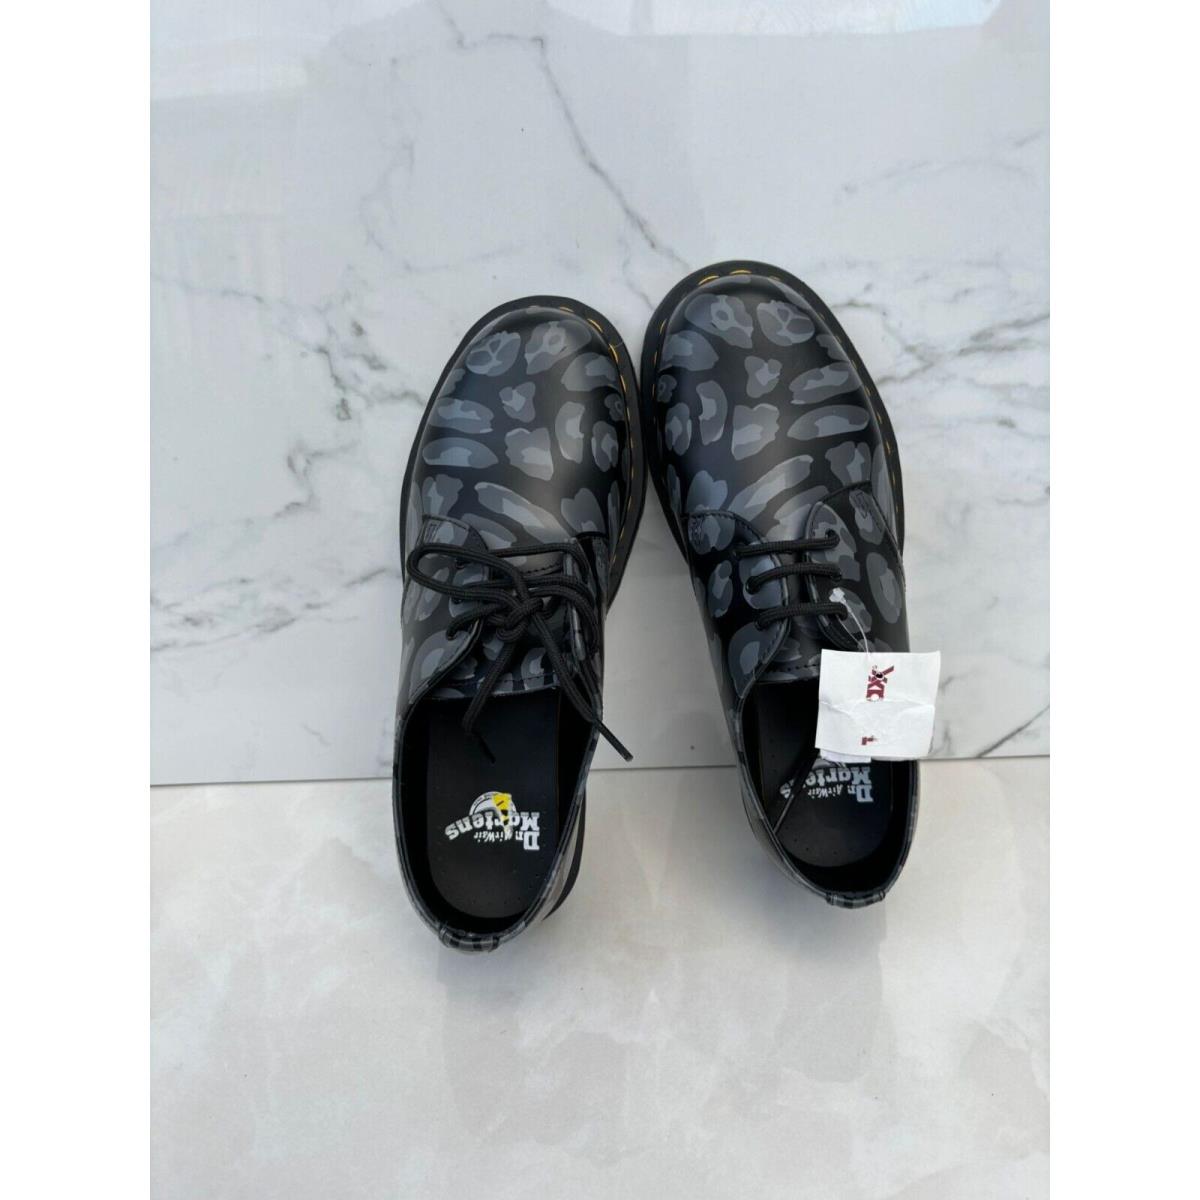 Dr. Martens Womens Distorted Leopard Print Oxford Lace Up Shoes Black Size 8